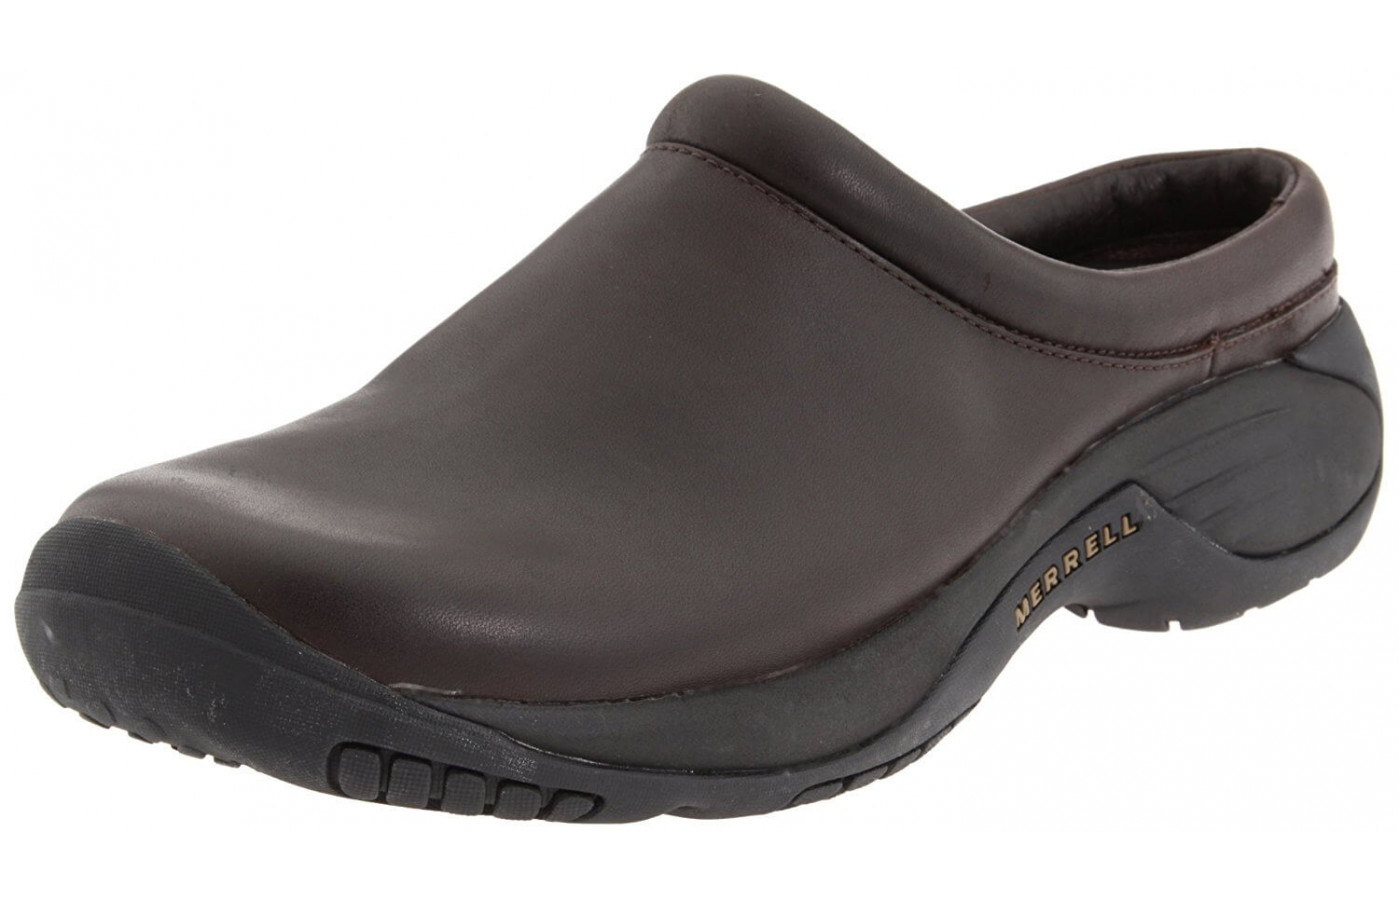 The Merrell Encore Gust has an arch shank for support